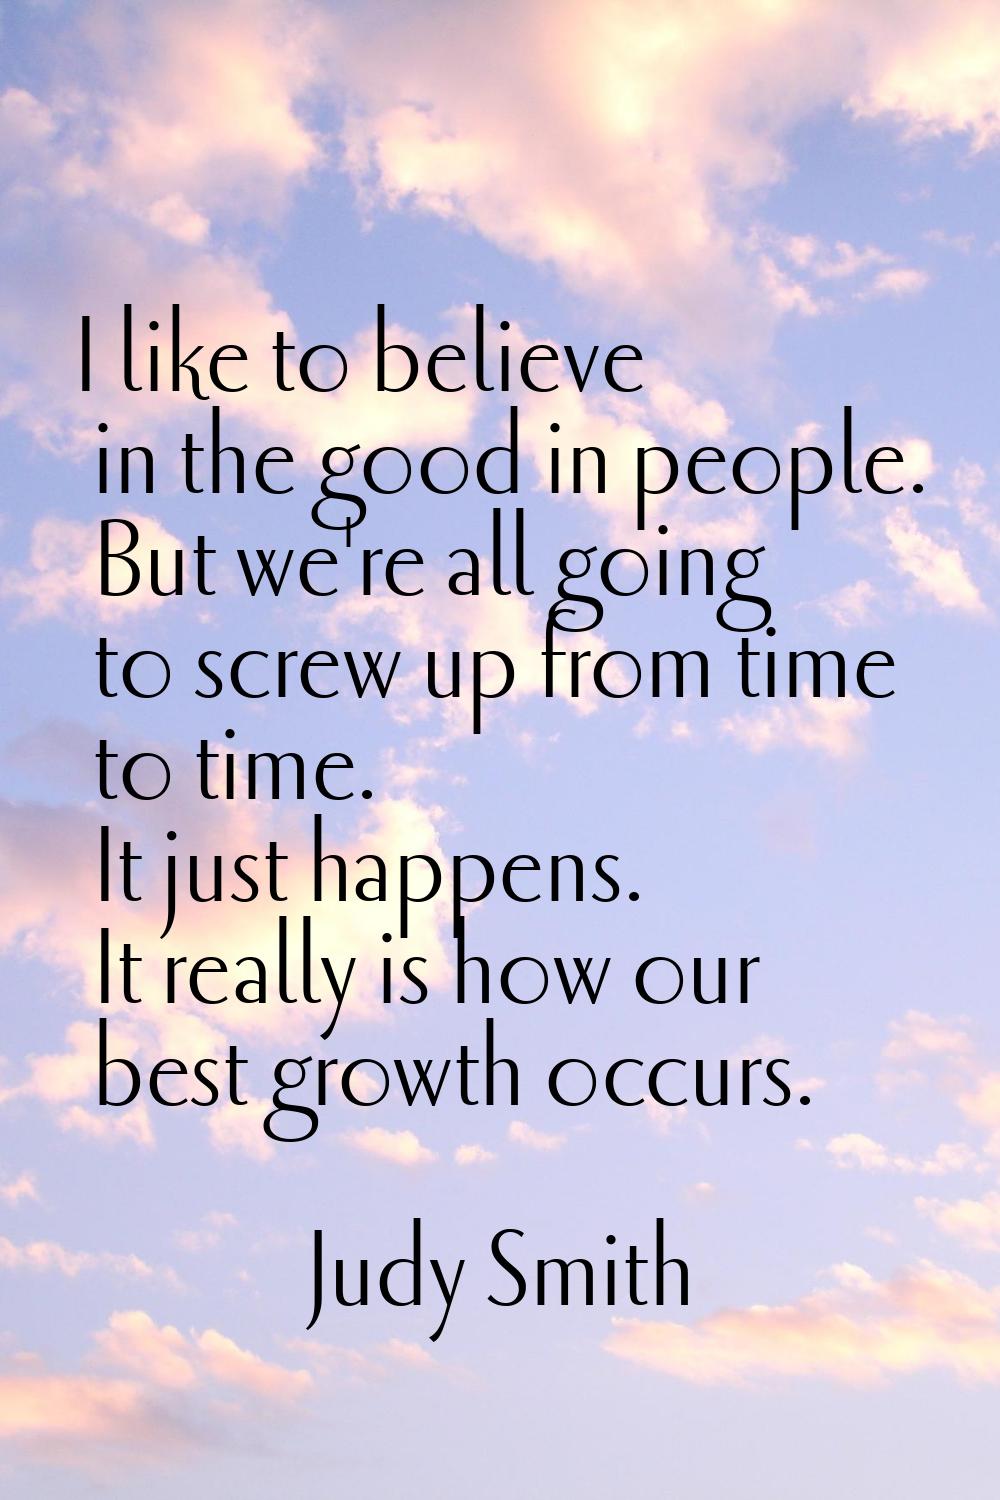 I like to believe in the good in people. But we're all going to screw up from time to time. It just